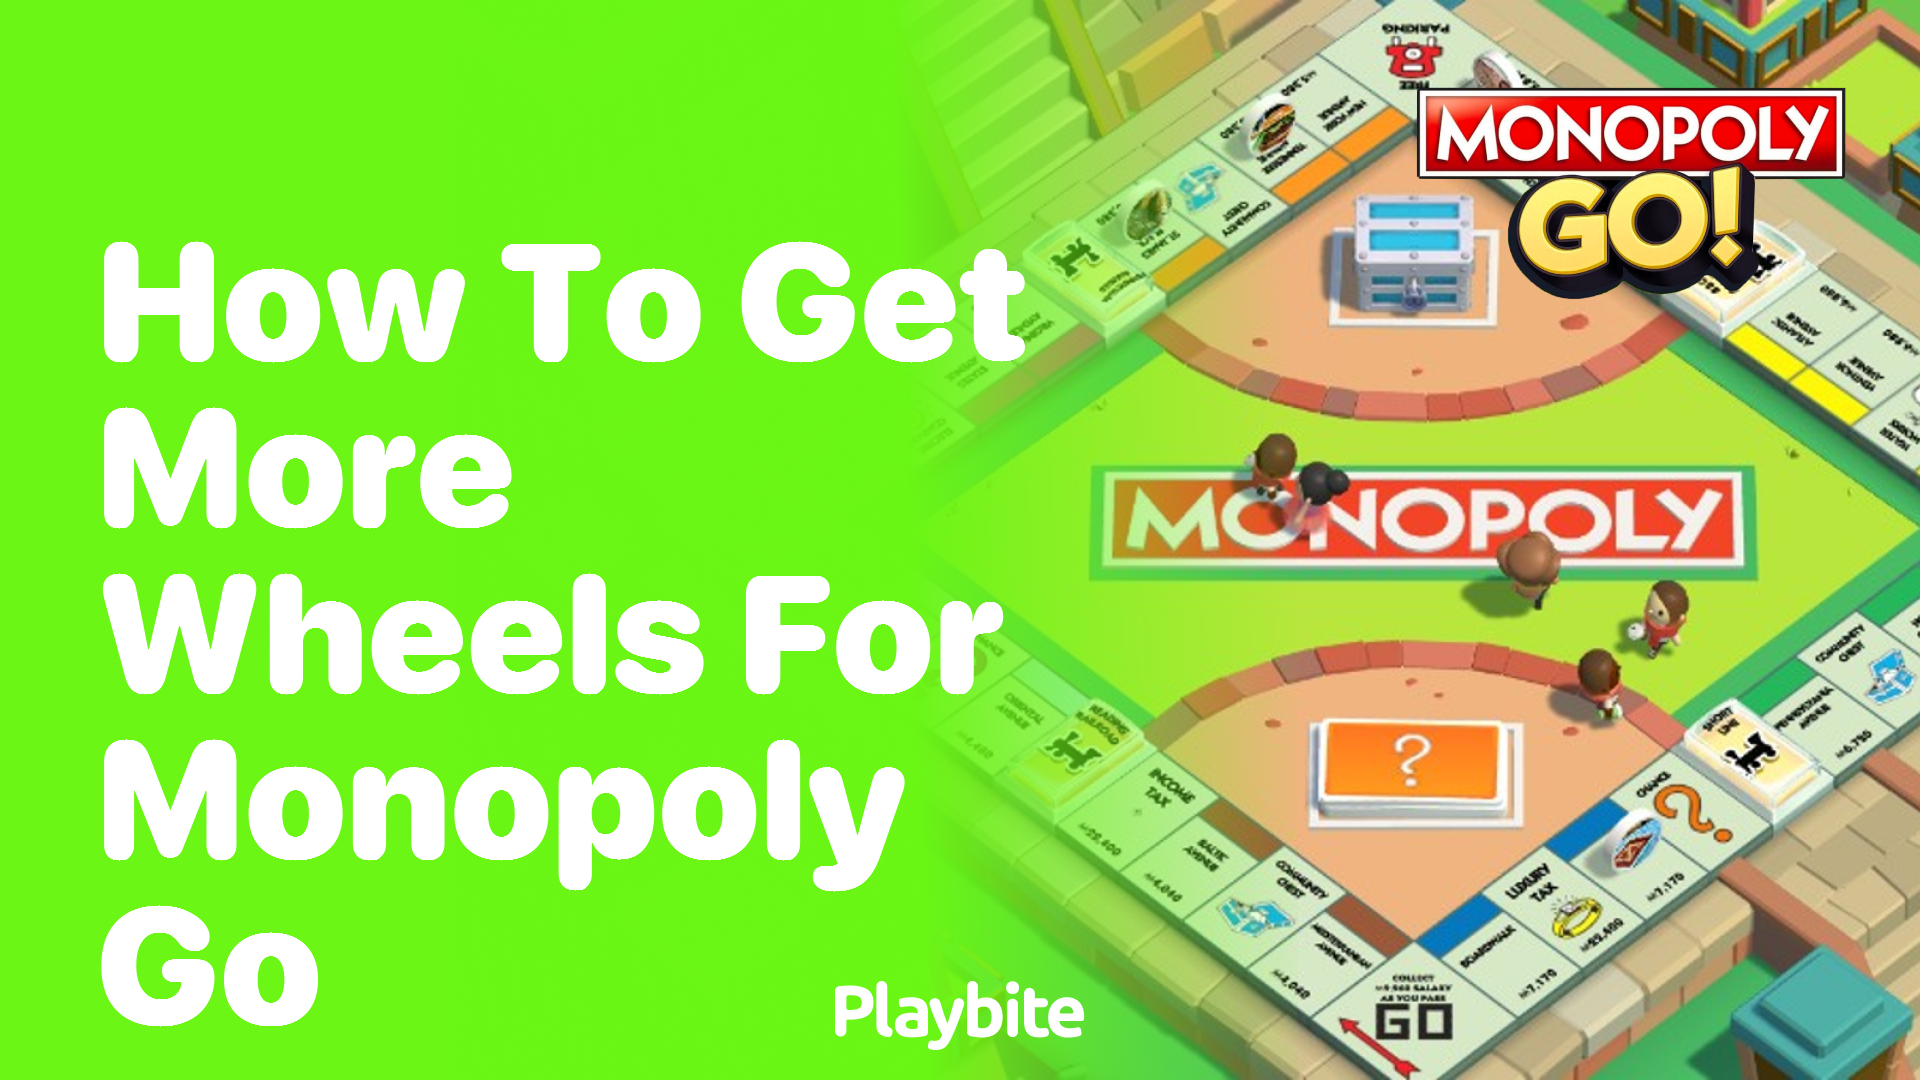 How to Get More Wheels for Monopoly Go